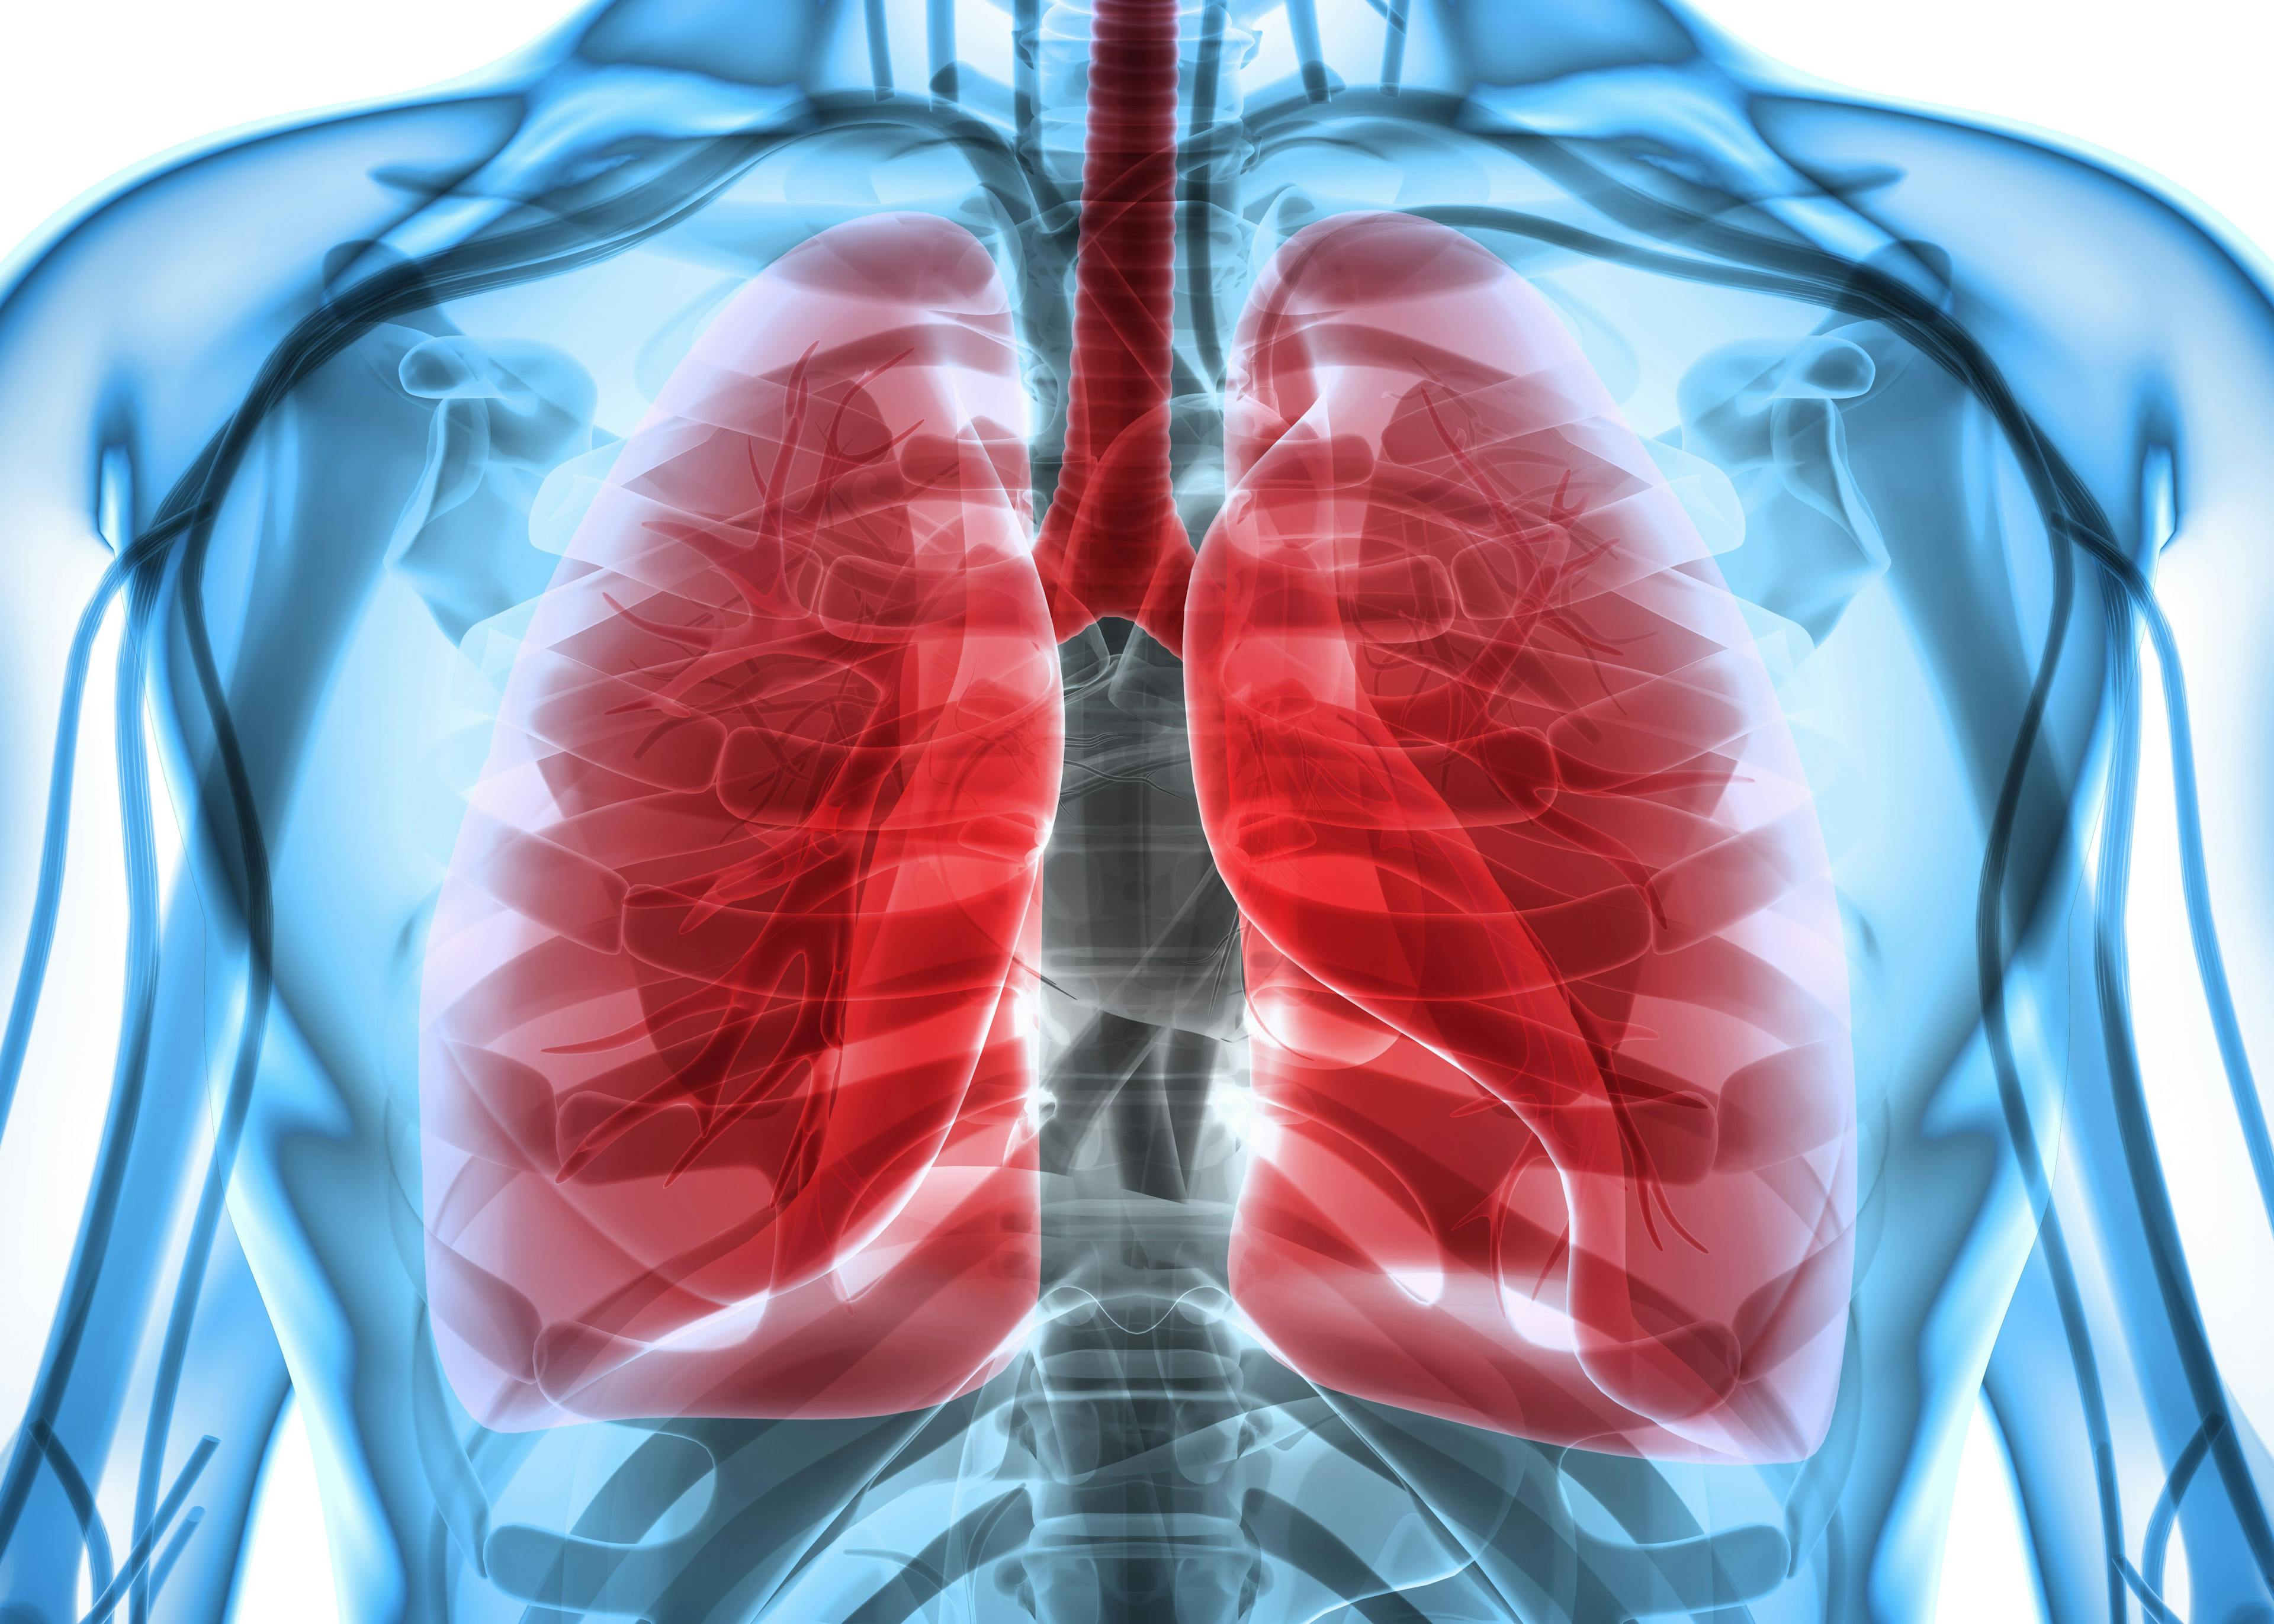 The Future of Adoptive Cellular Therapy in Lung Cancer